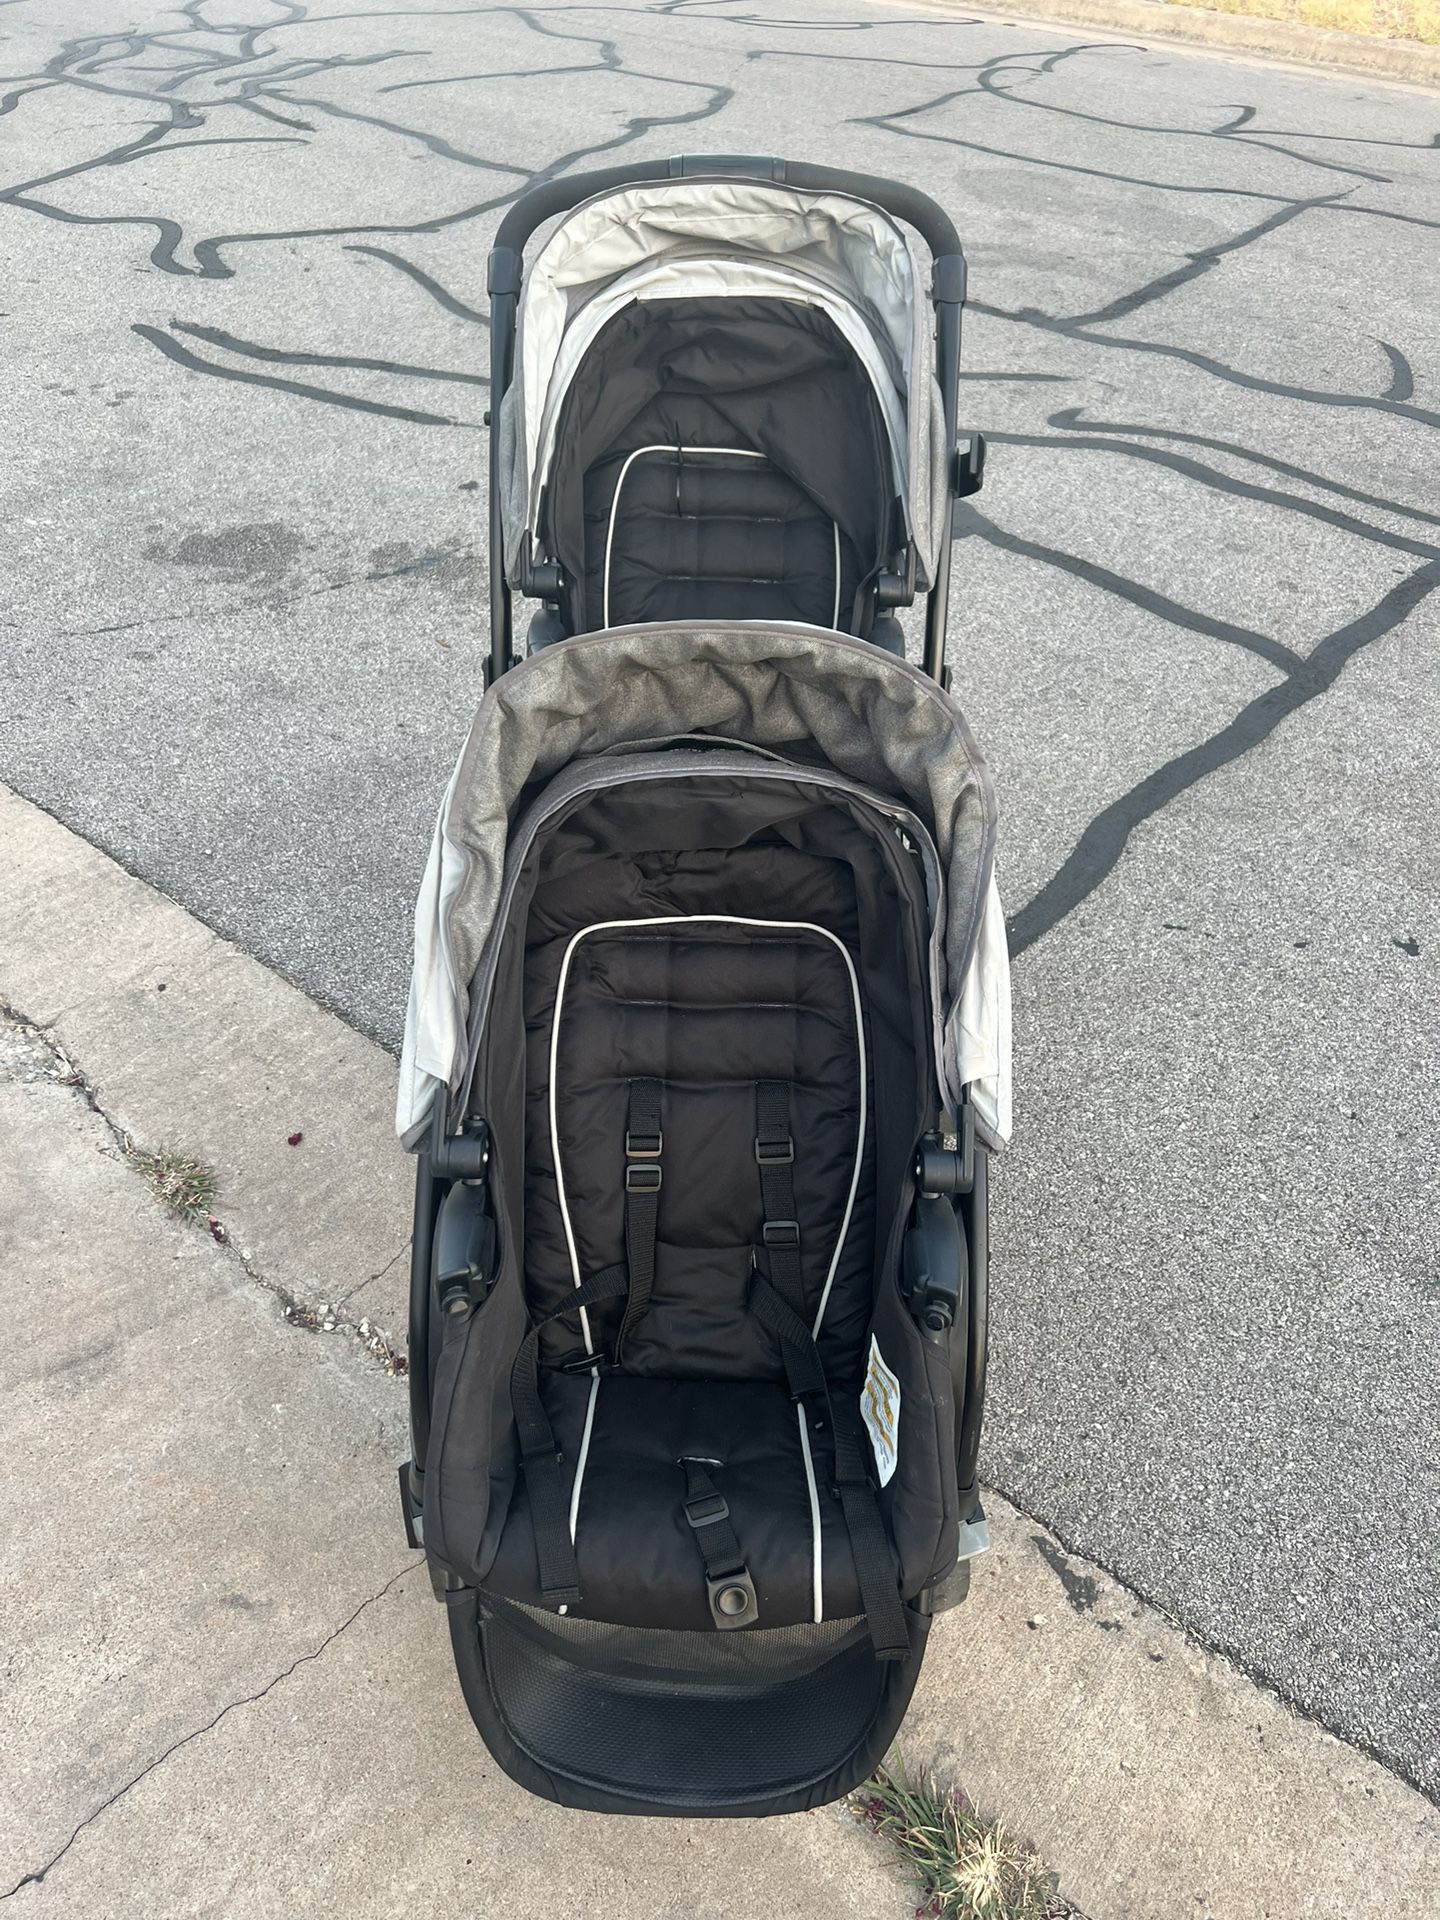 Graco Modes Duo Stroller like new